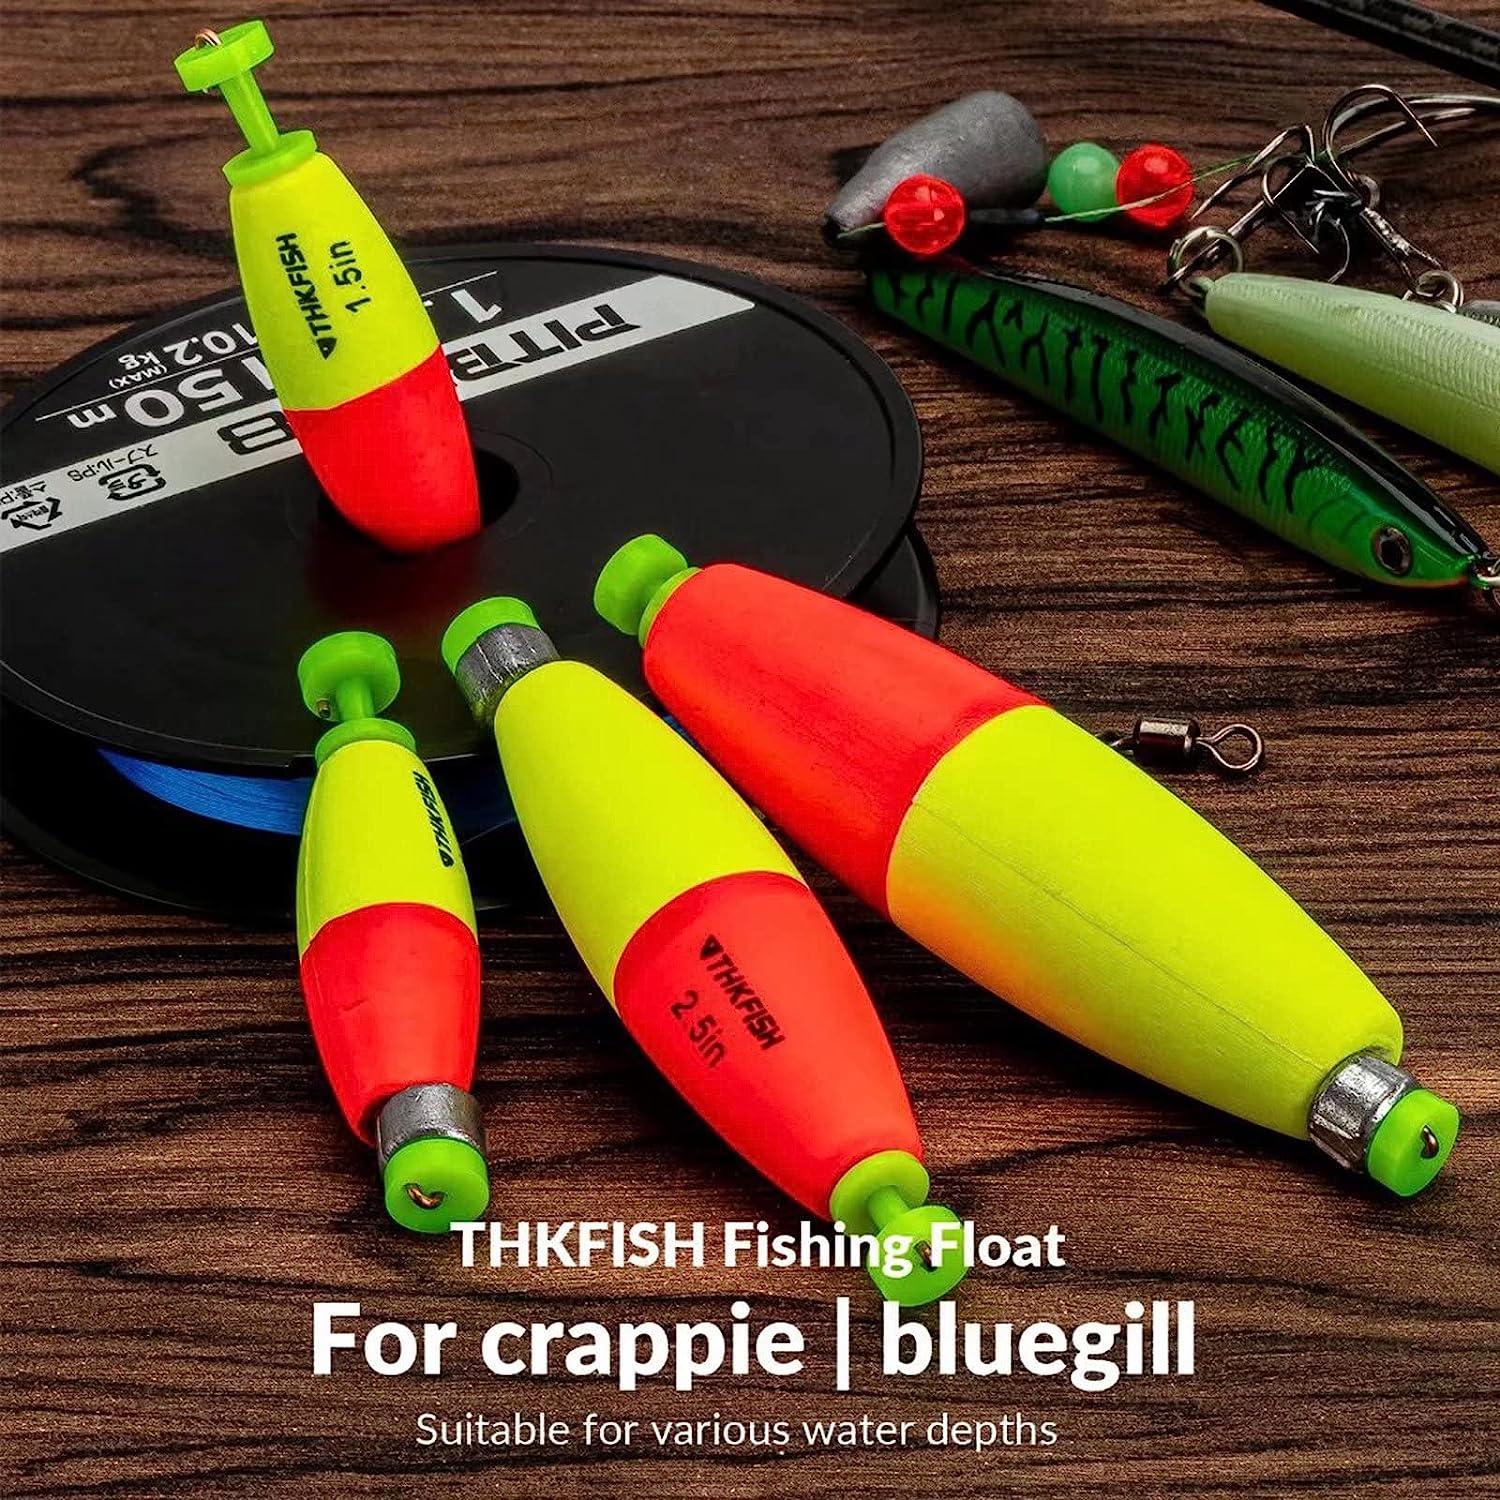 THKFISH Fishing Bobbers Floats 5PCS EVA Foam Round Floats Red/Green Snap-On  Weighted Bobbers Cigar Floats Spring Fishing Buoy Accessories for